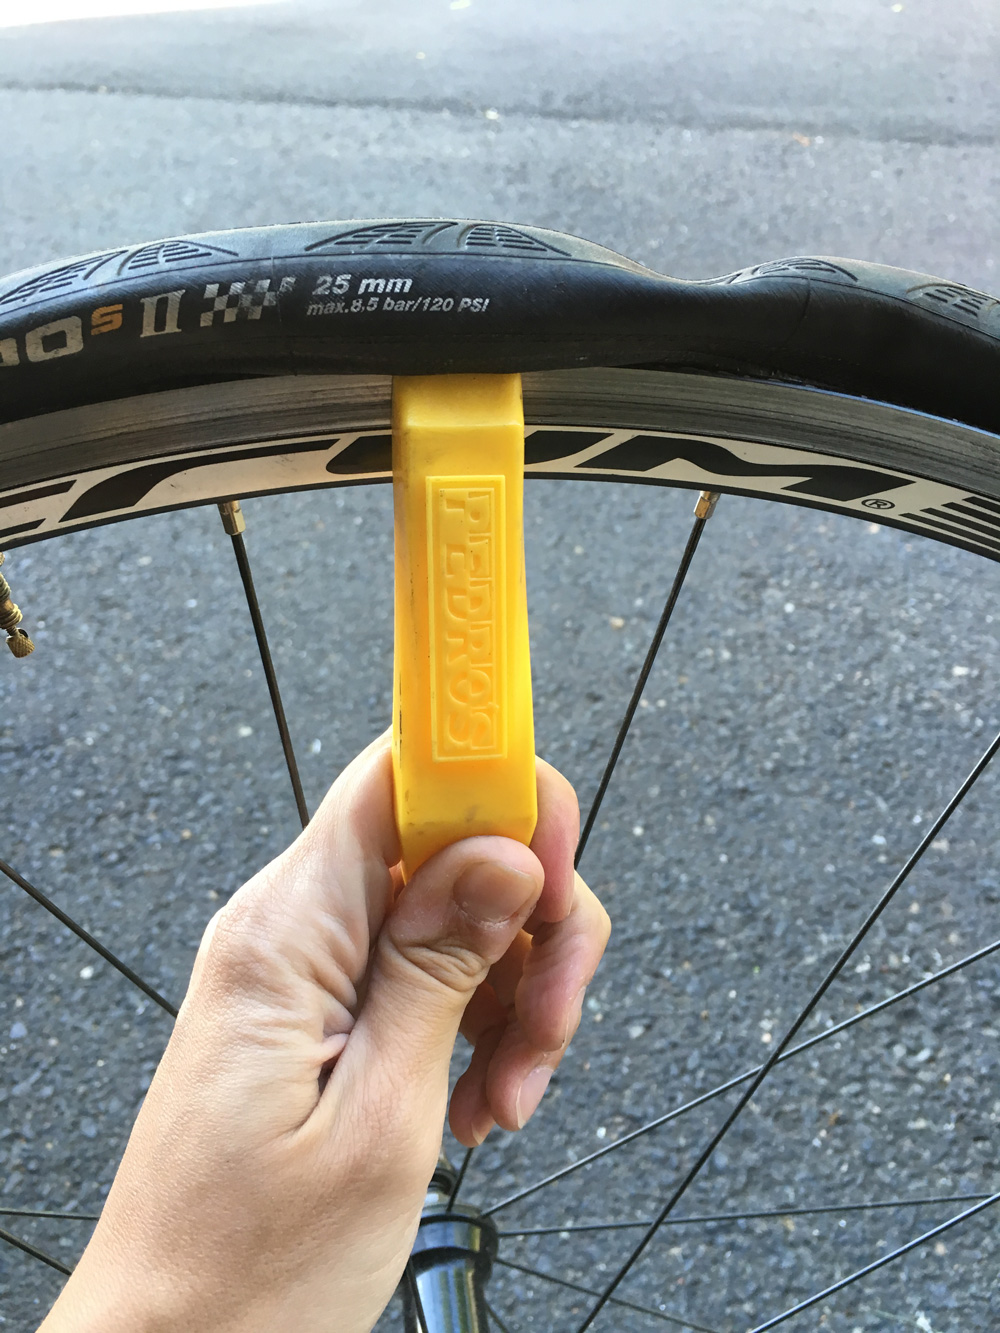 Insert your tire lever and start working the tire off of the wheel. You may need to use two levers if you are having trouble getting the tire off.